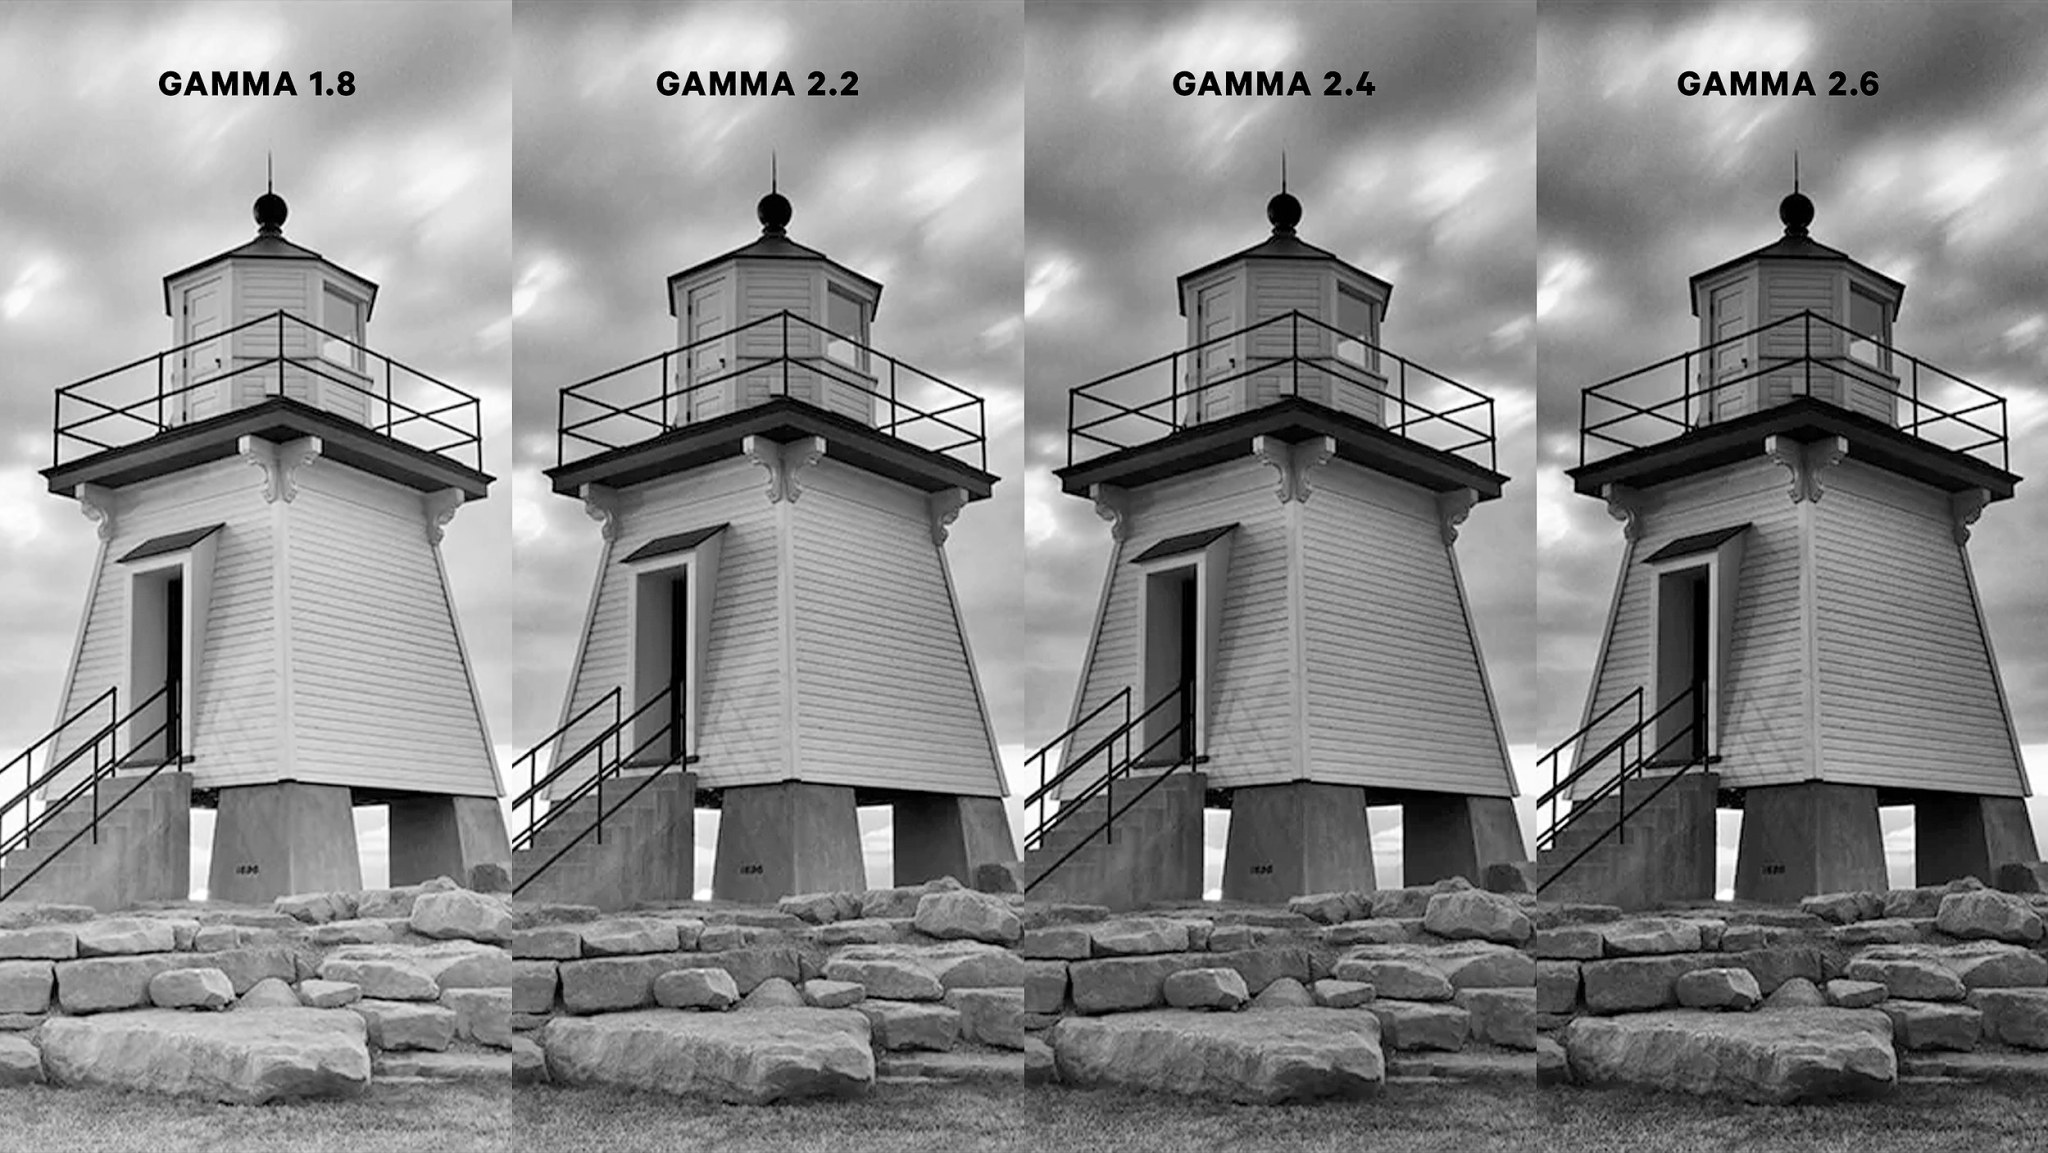 lighthouse image treated with various gamma levels